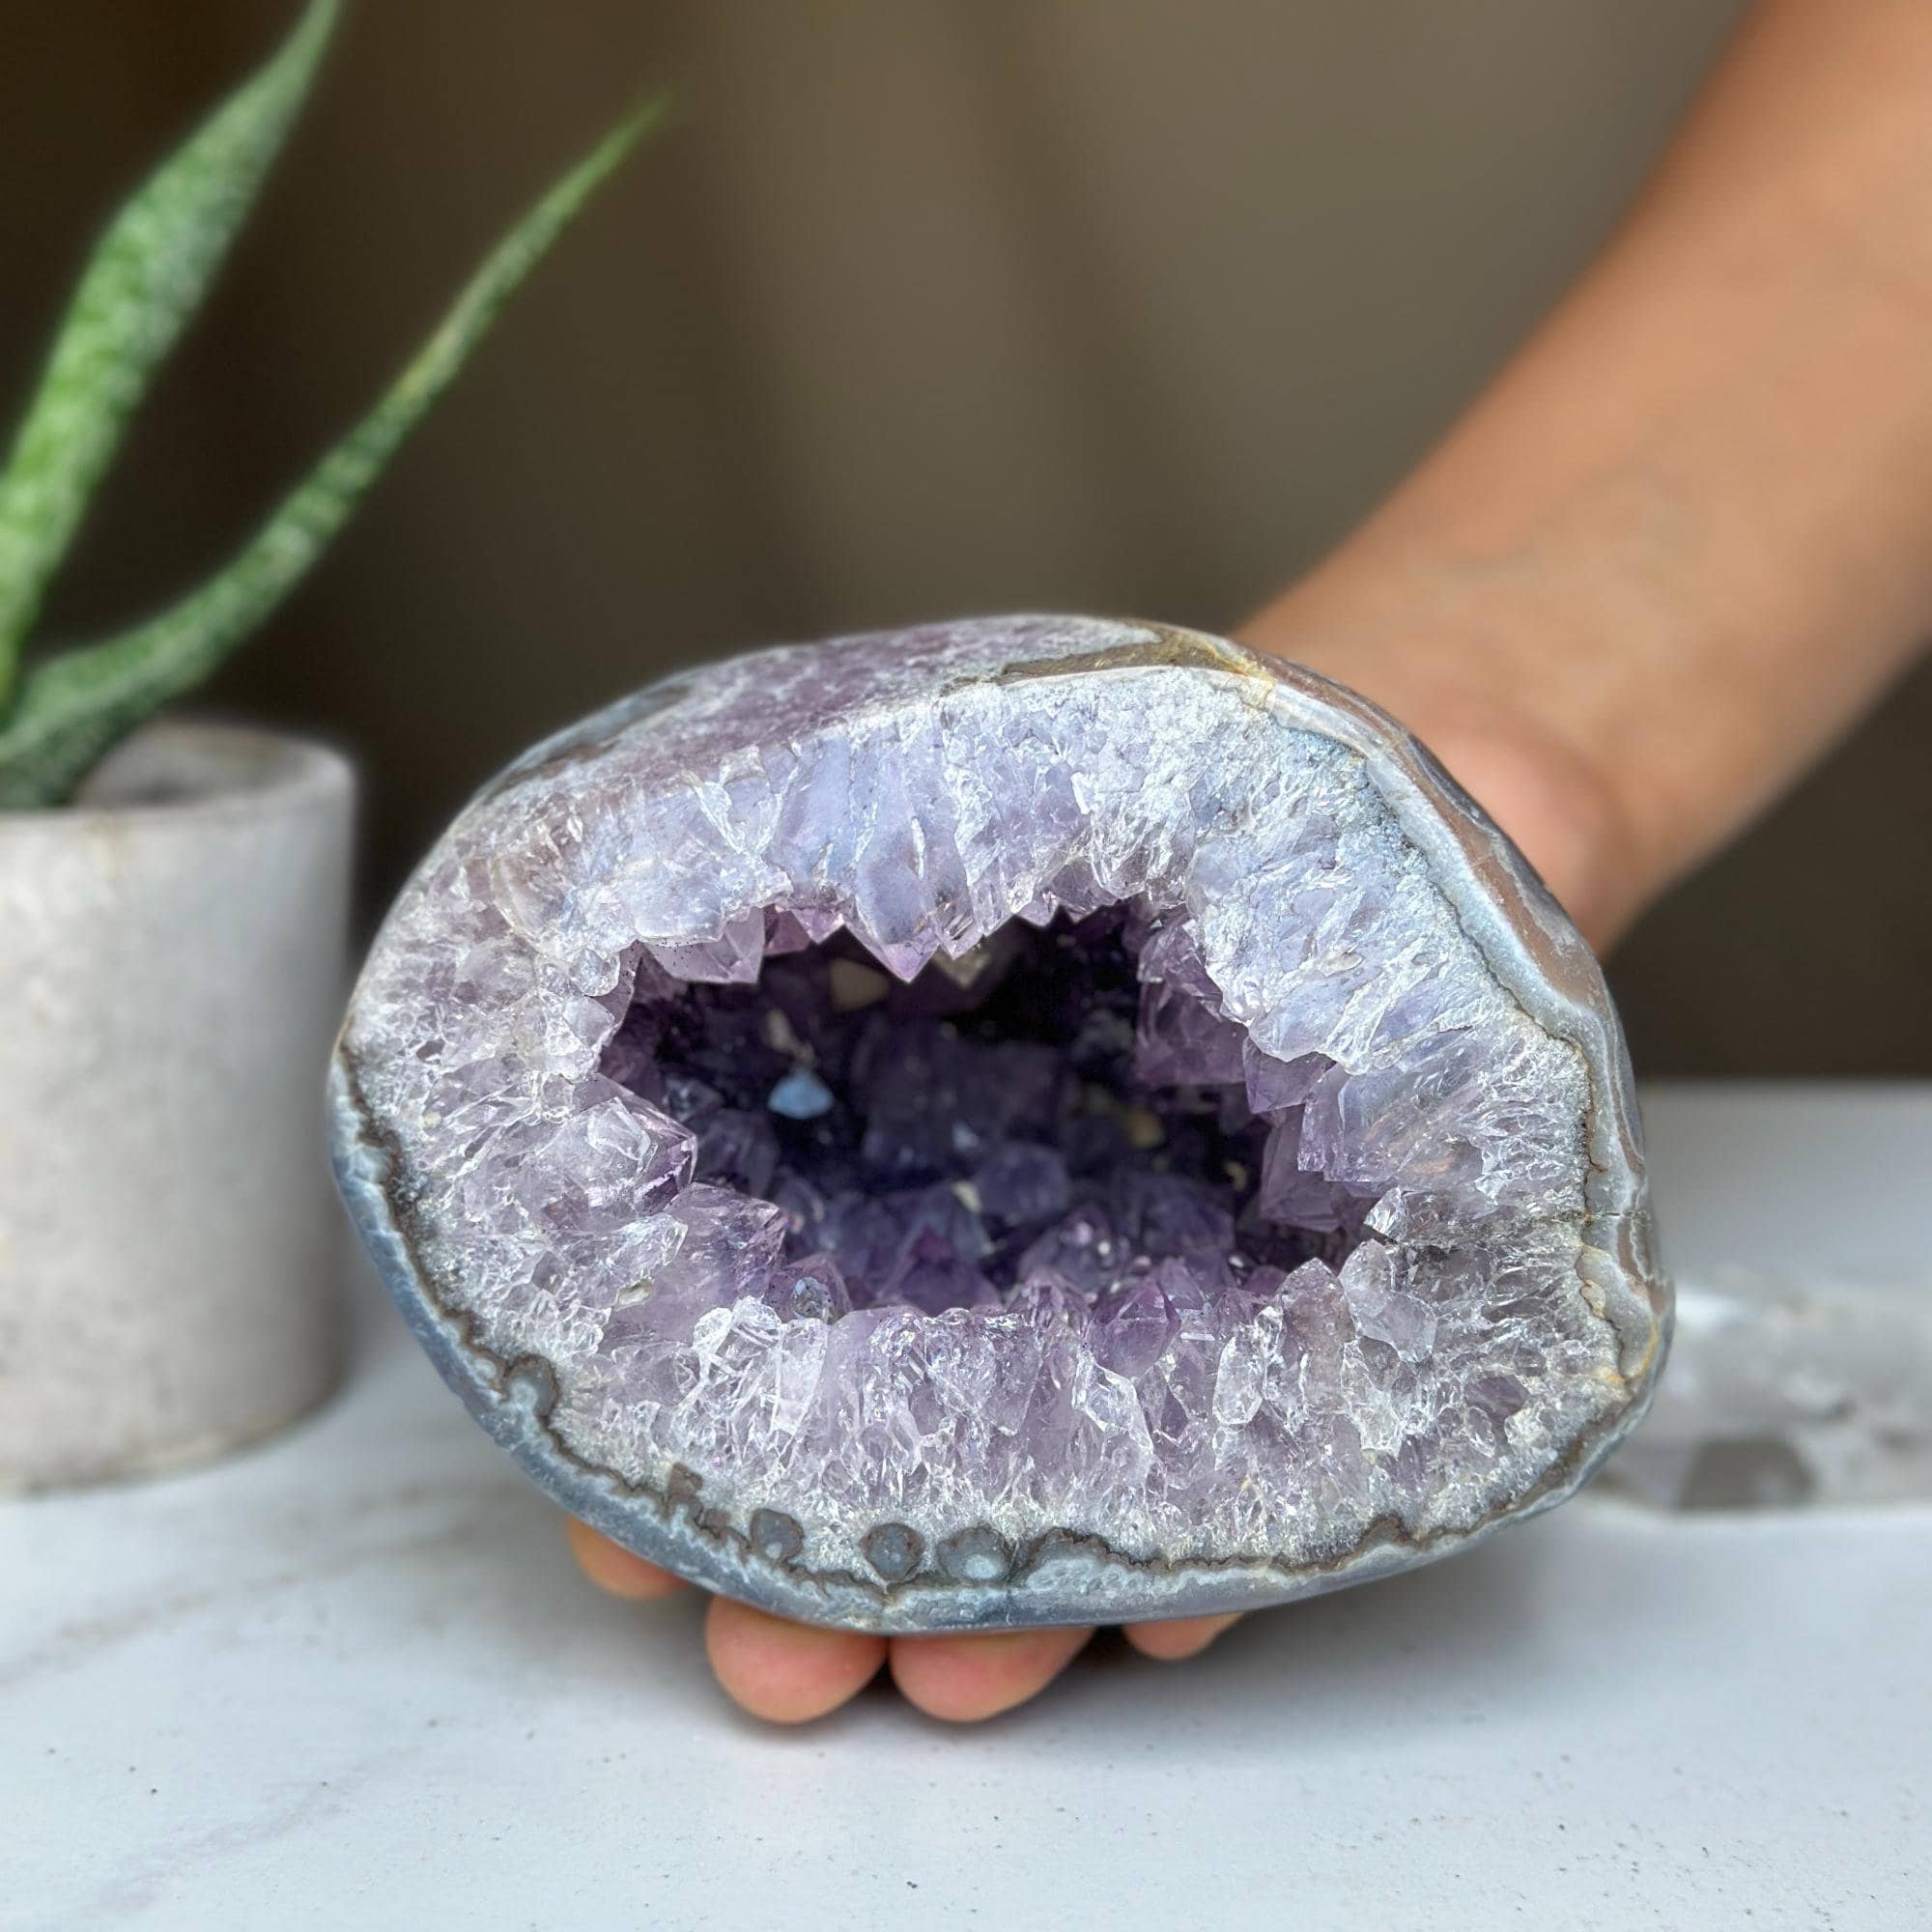 Amethyst Centerpiece Cave Geode with Agate Formations, Toptable Home Decor Crystal, High Quality Quartz Cluster from Uruguay